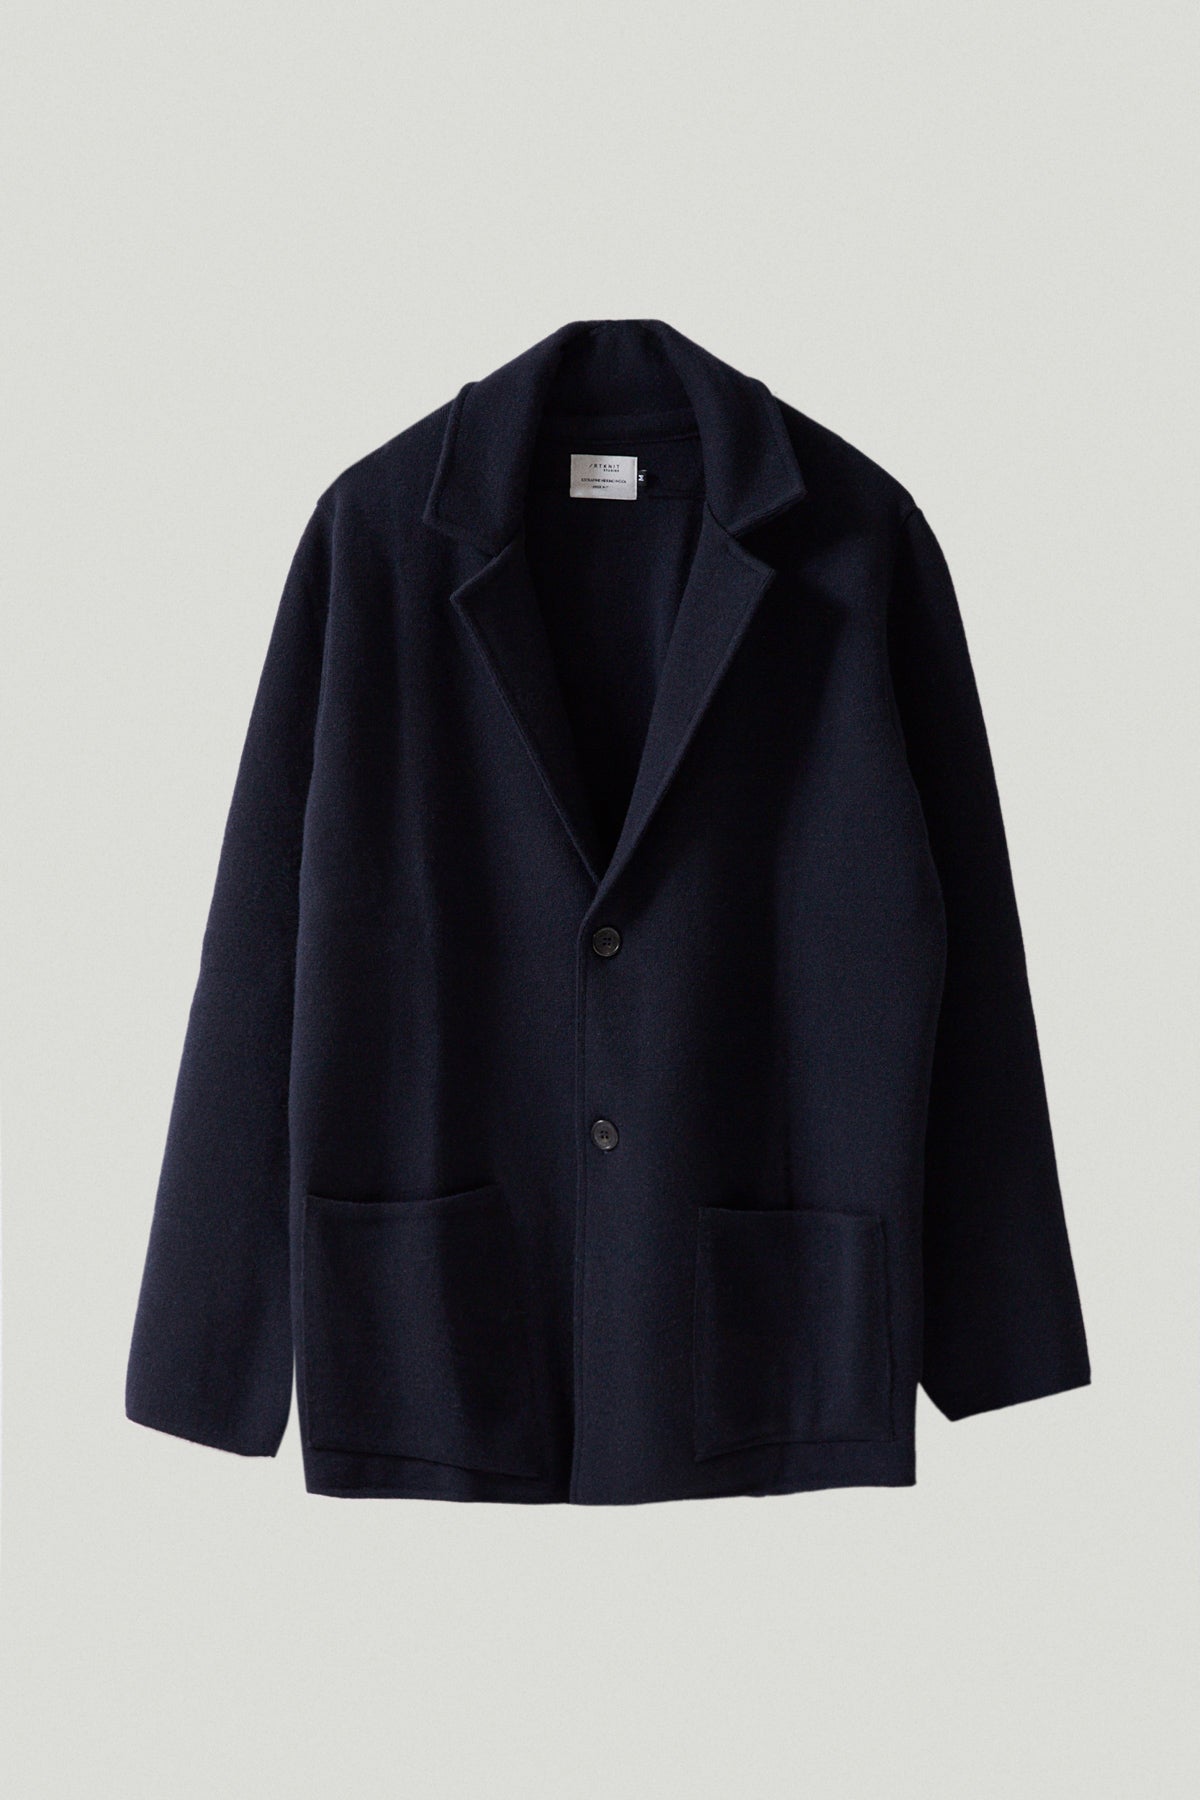 the boiled wool blazer imperfect version oxford blue